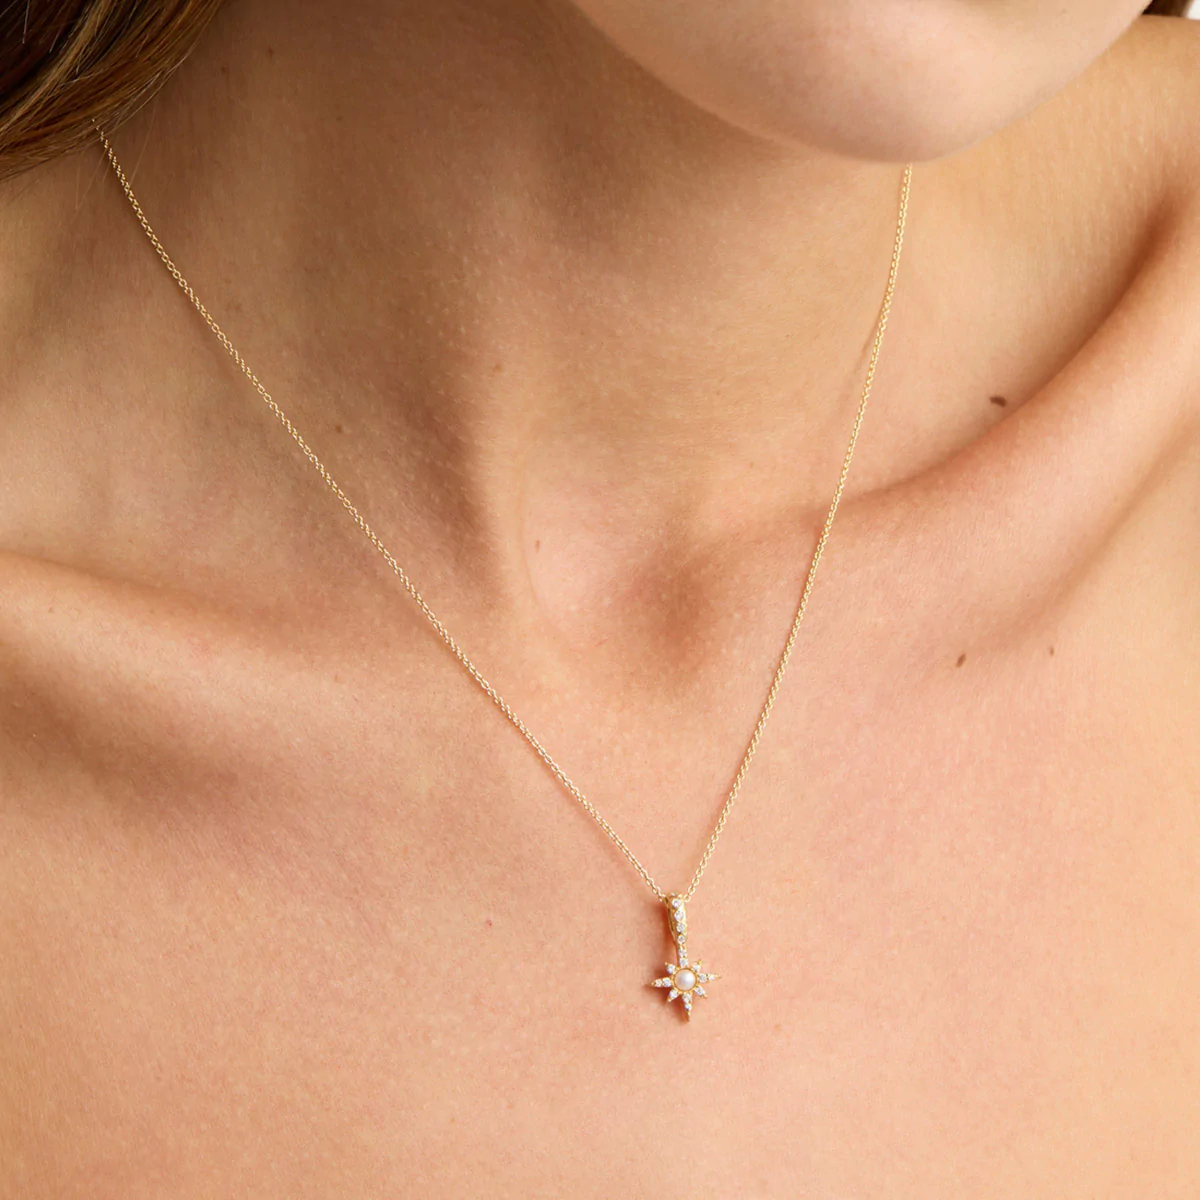 BY CHARLOTTE | DANCING IN THE STARLIGHT PEARL PENDANT